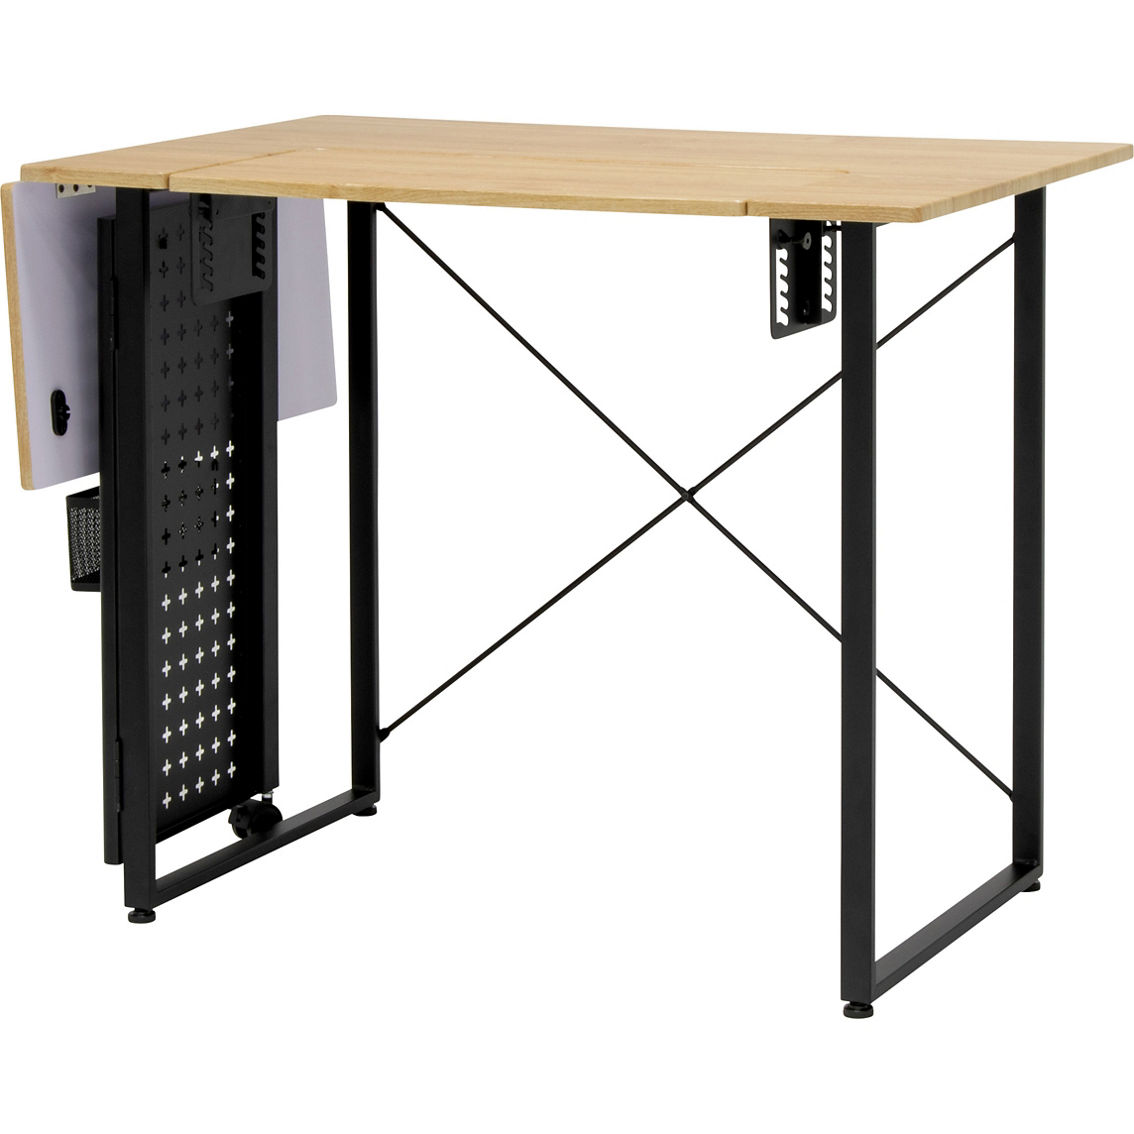 Studio Designs Pivot Sewing Table with Swingout Storage Panel - Image 3 of 10